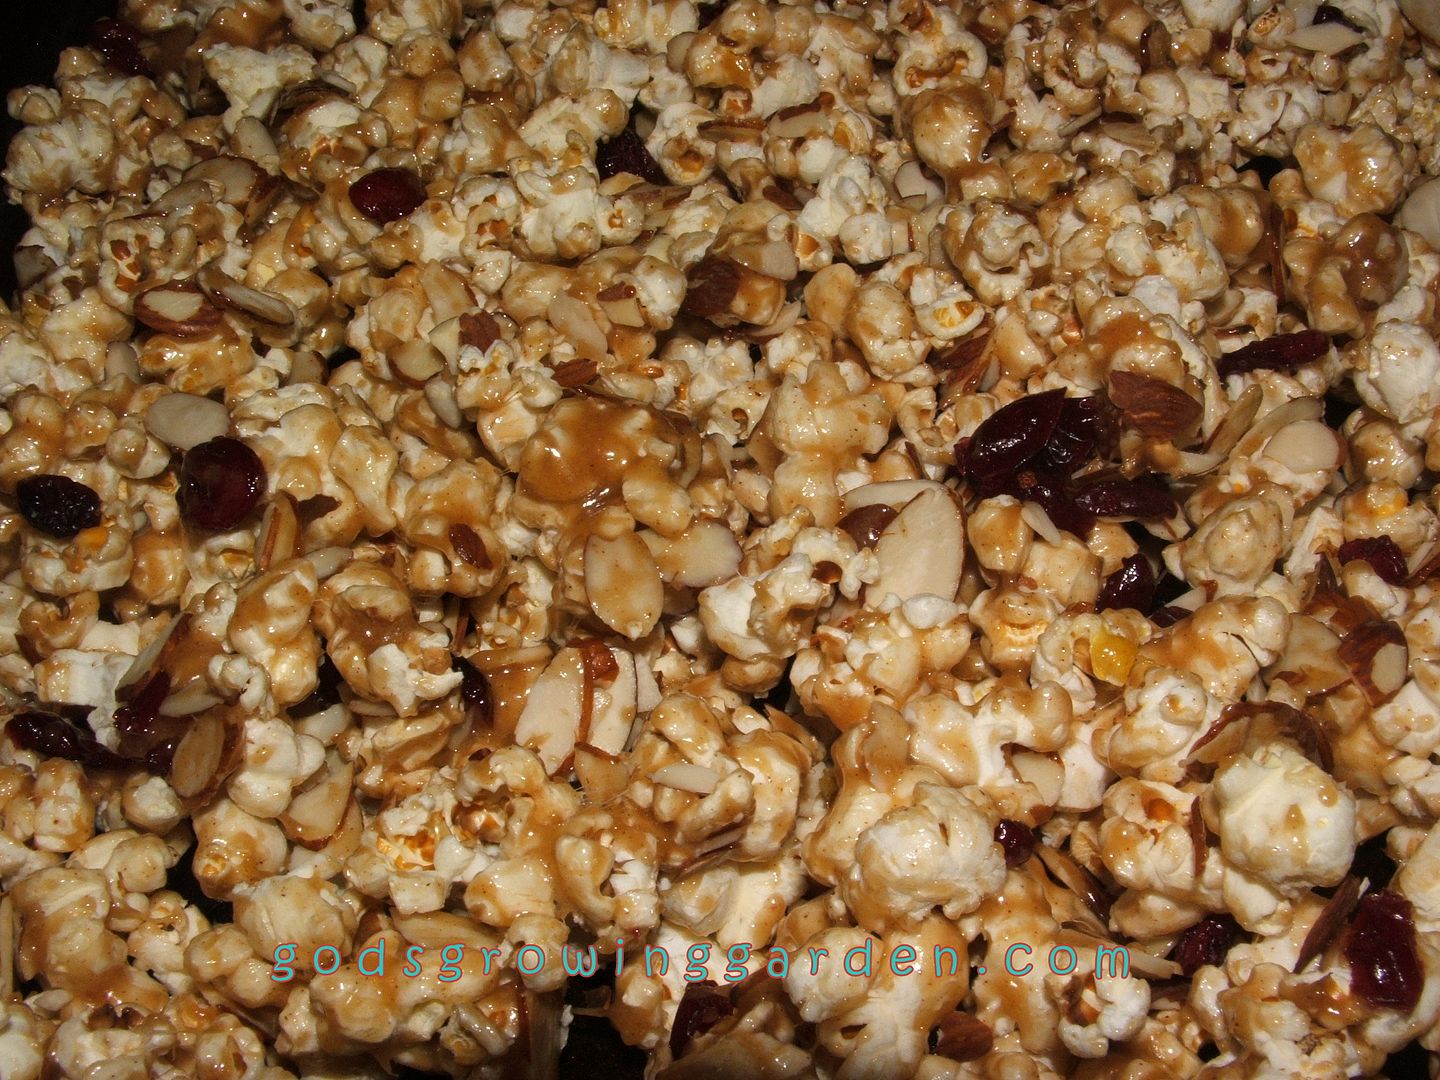 caramel popcorn by Angie Ouellette-Tower for godsgrowinggarden.com photo 007_zps6cf9d867.jpg